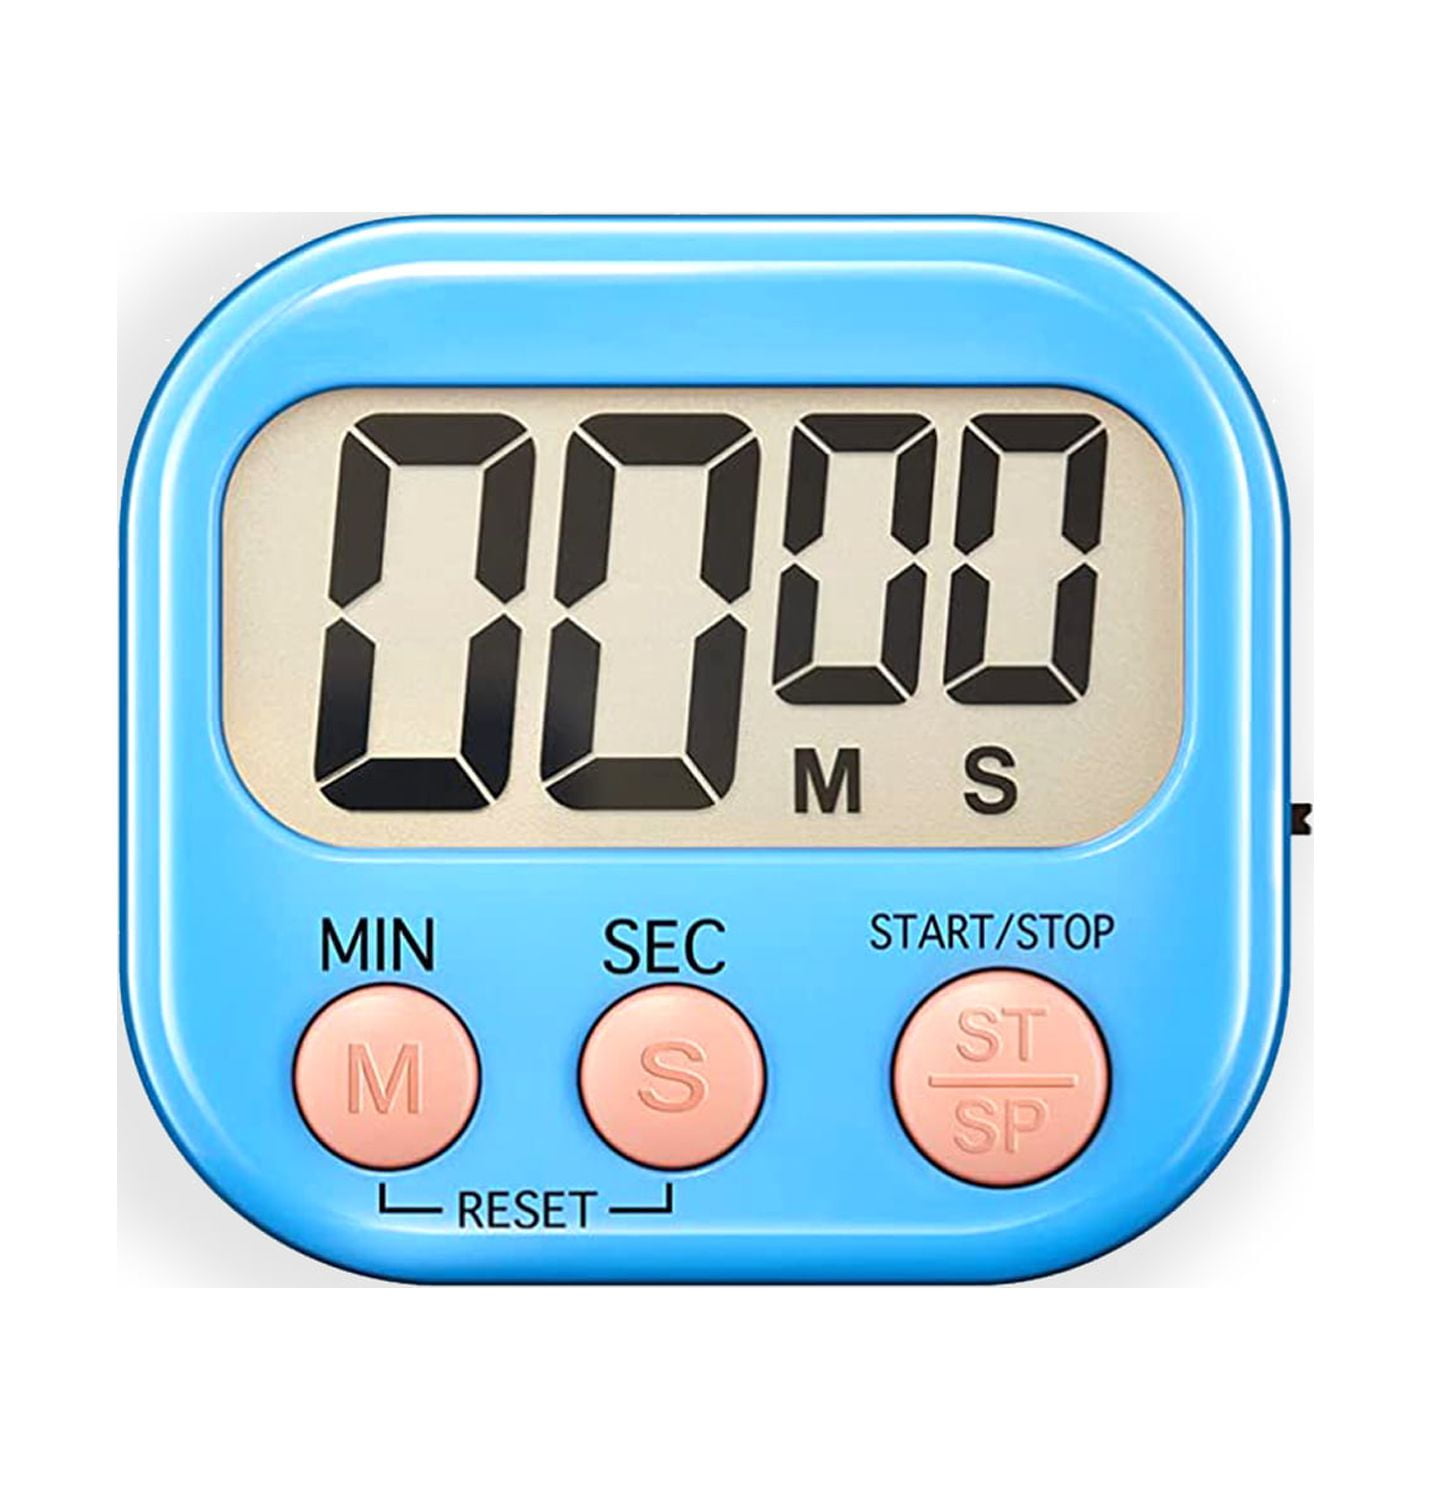 Free & Awesome Classroom Timer for the Classroom - TechnologyEDUC